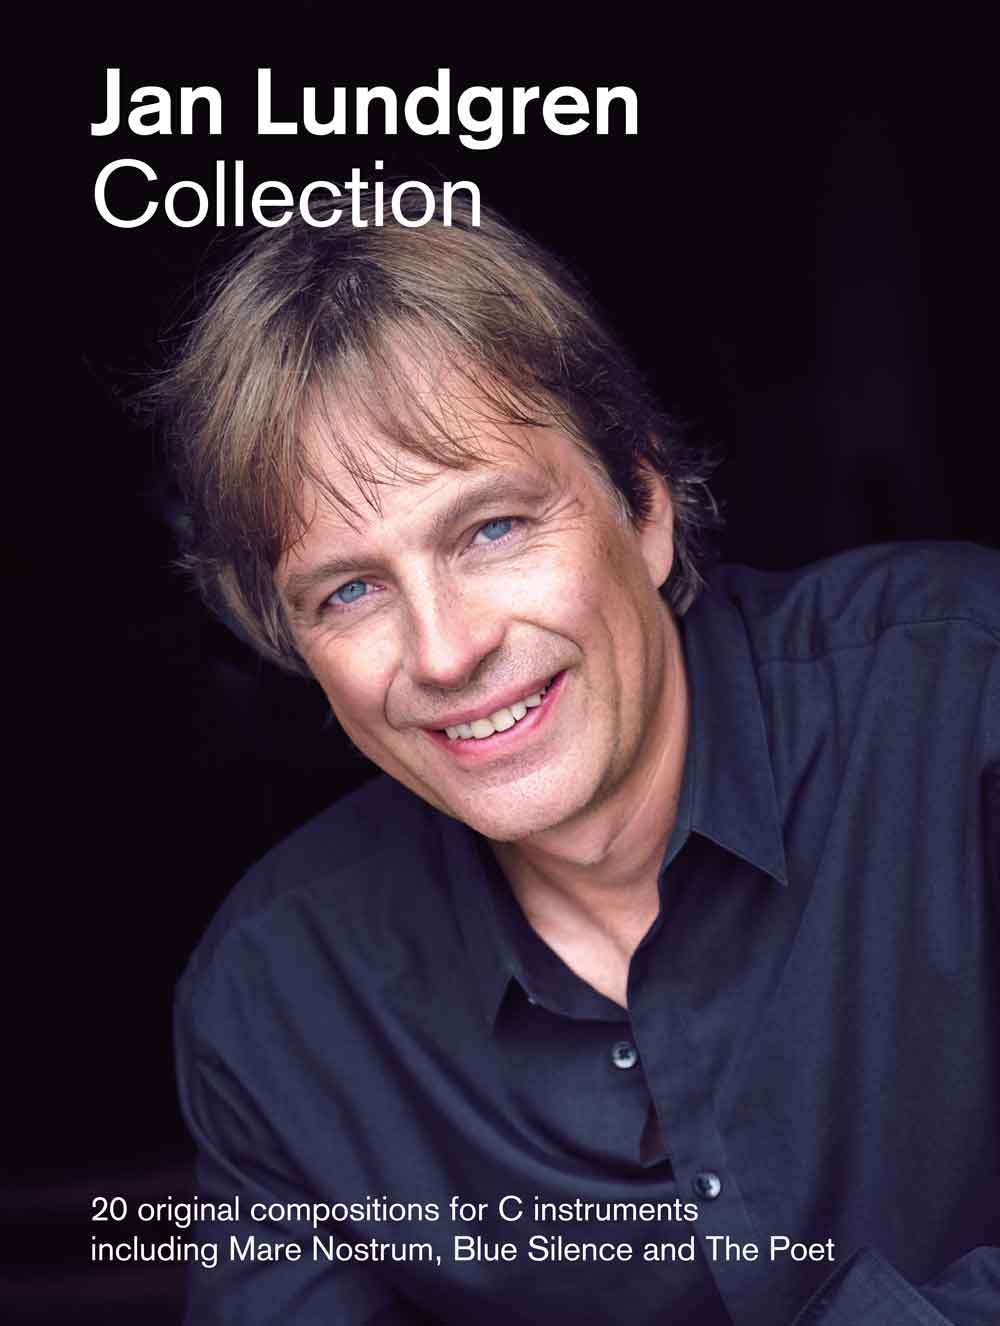 Jan Lundgren Collection: 20 original compositions for C instruments including Mare Nostrum, Blue Silence and The Poet